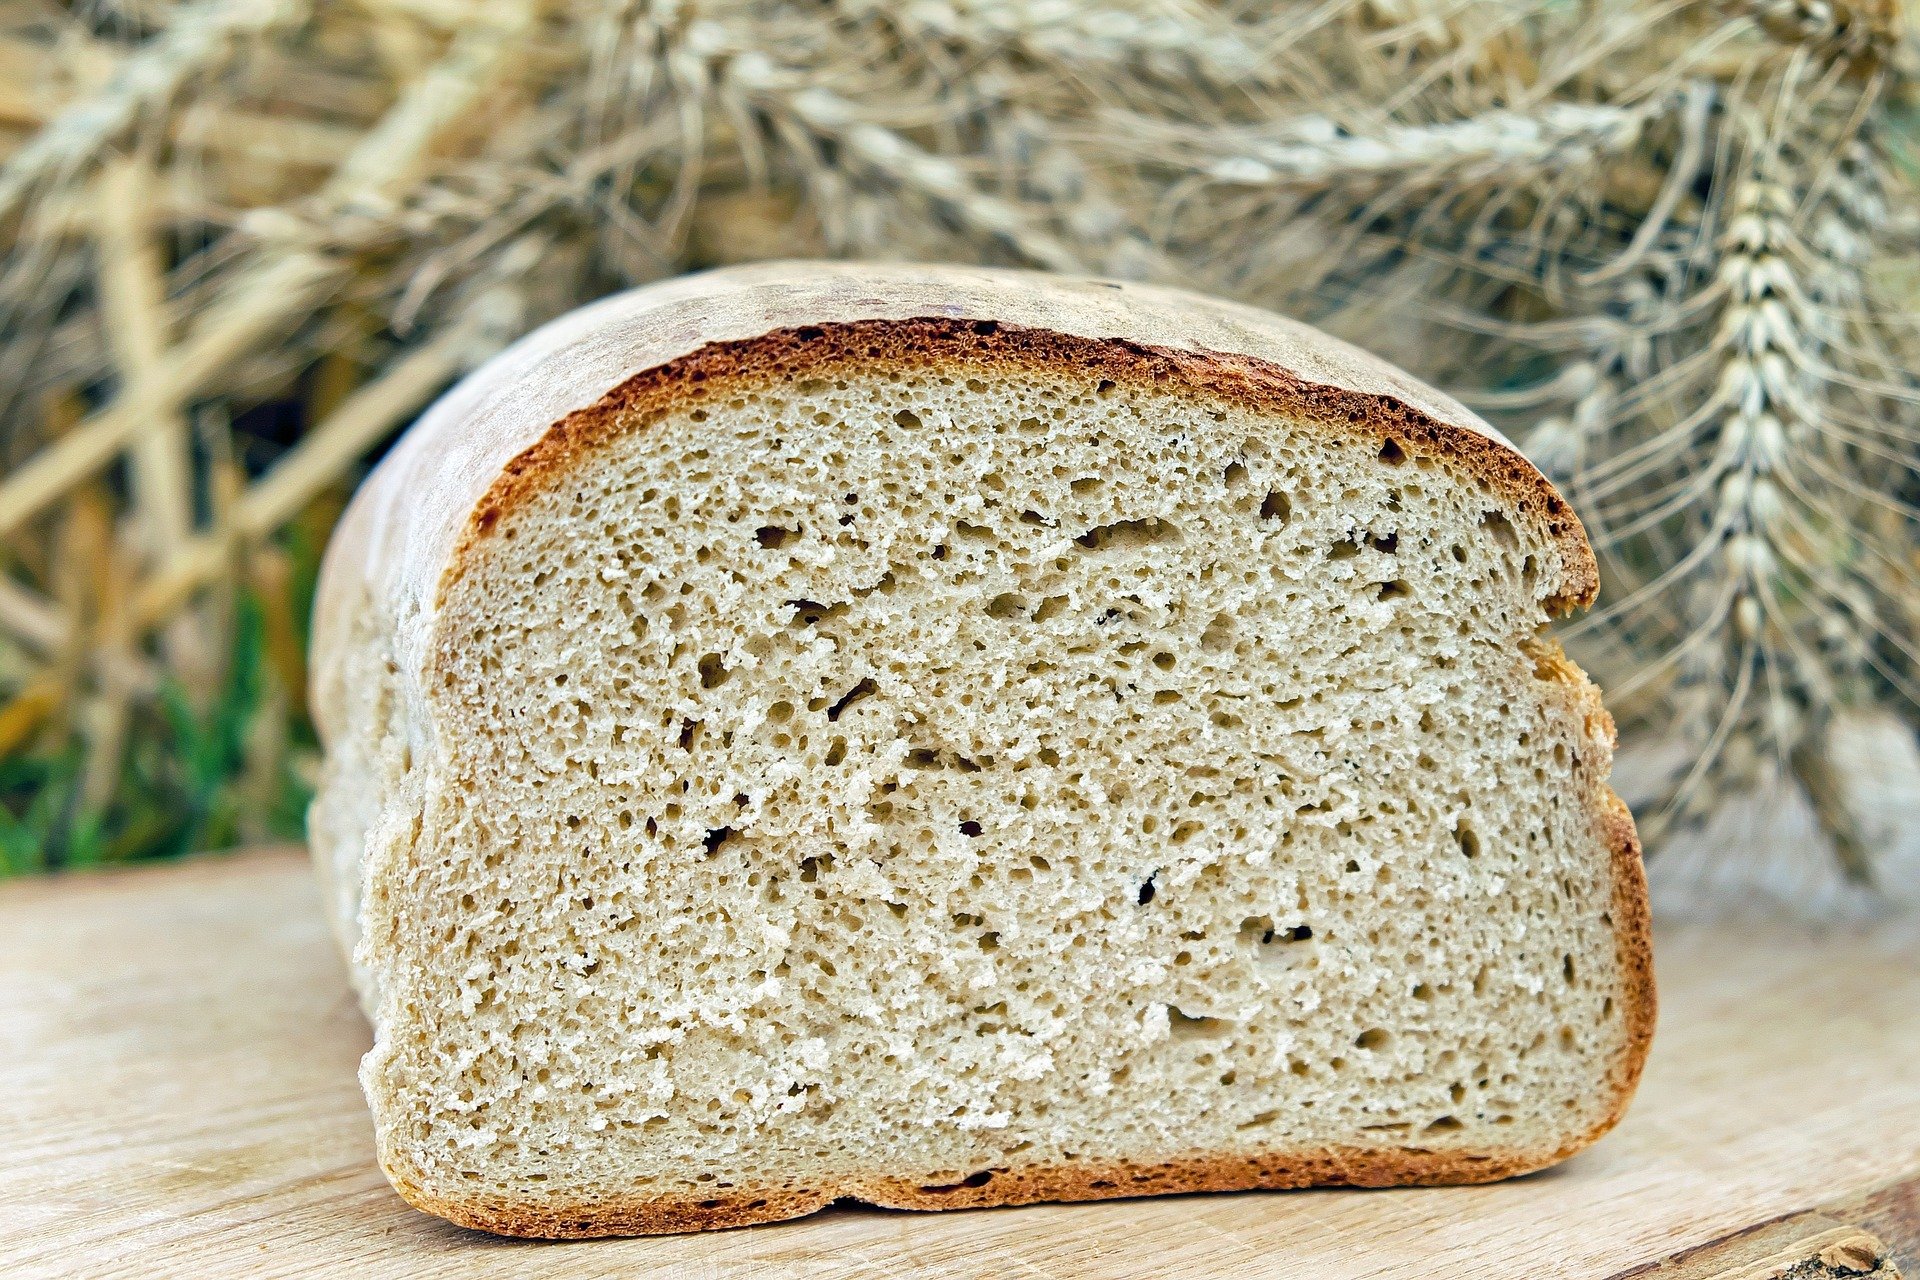 Bread Allergens and Ingredients